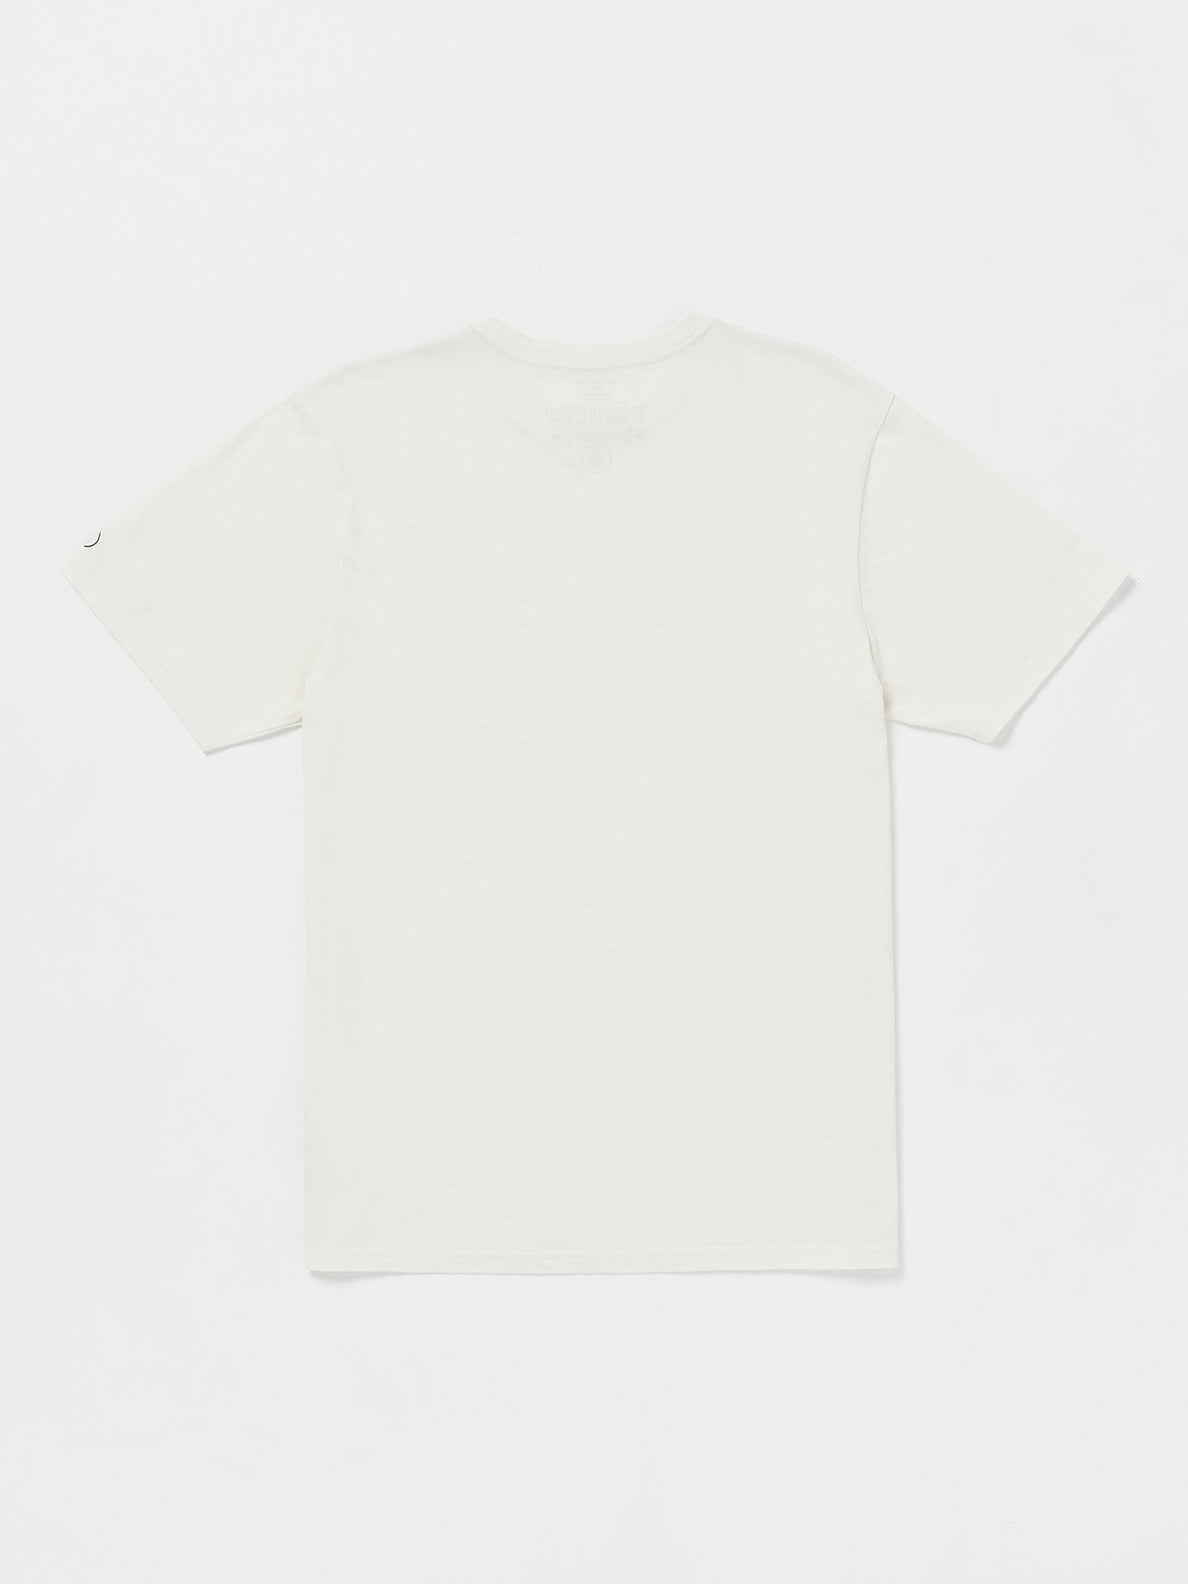 Solid Short Sleeve Tee - Off White